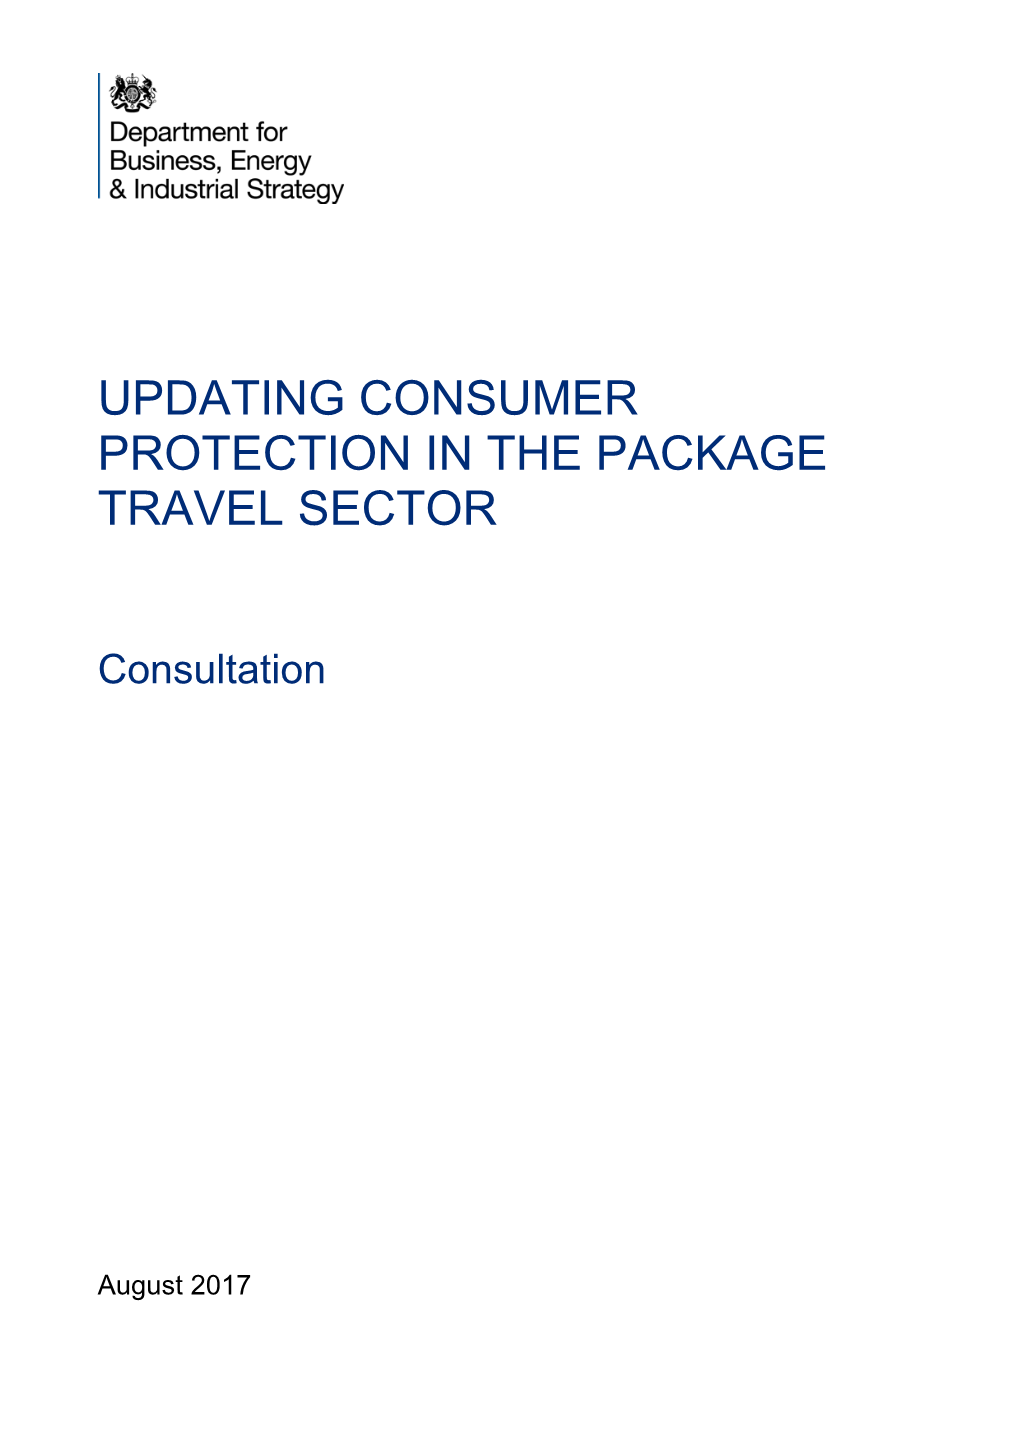 Updating Consumer Protection in the Package Travel Sector